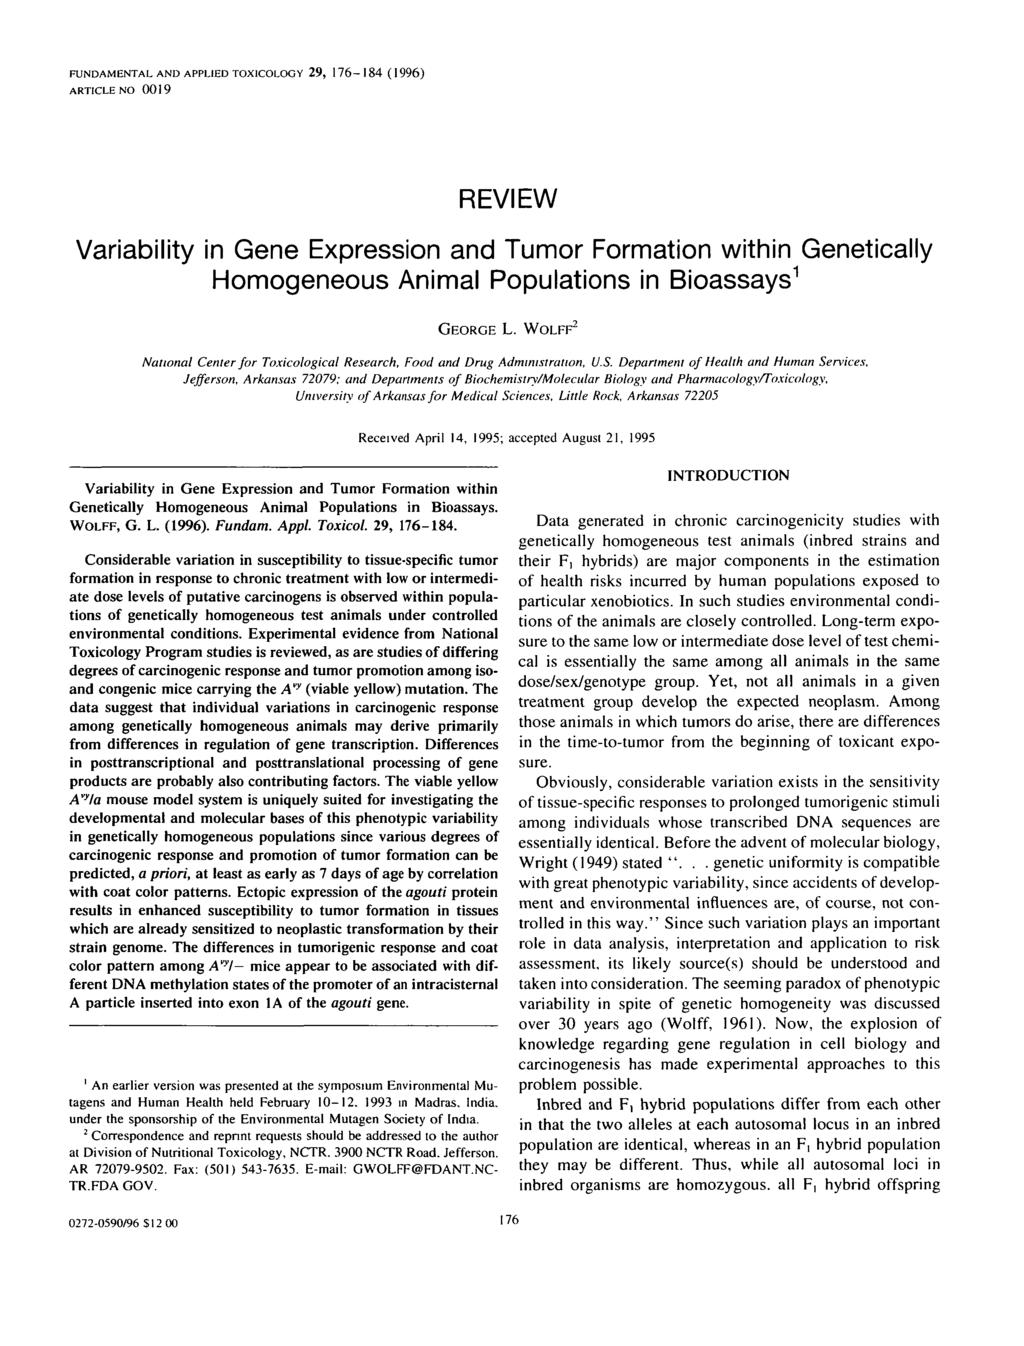 FUNDAMENTAL AND APPLIED TOXICOLOGY 29, 176-184 (1996) ARTICLE NO 0019 REVIEW Variability in Gene Expression and Tumor Formation within Genetically Homogeneous Animal Populations in Bioassays 1 GEORGE